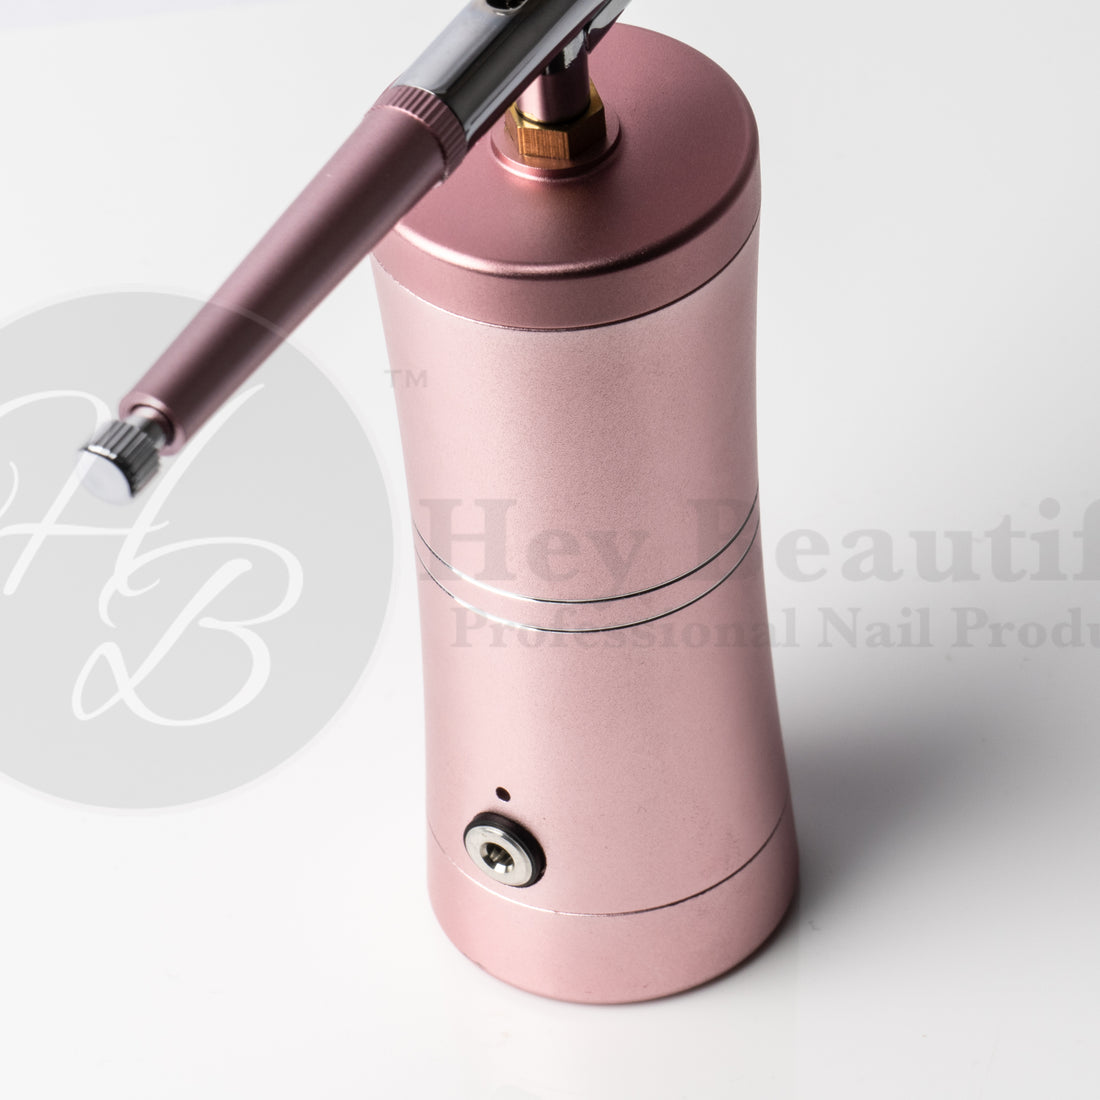 Airbrush, For Nails